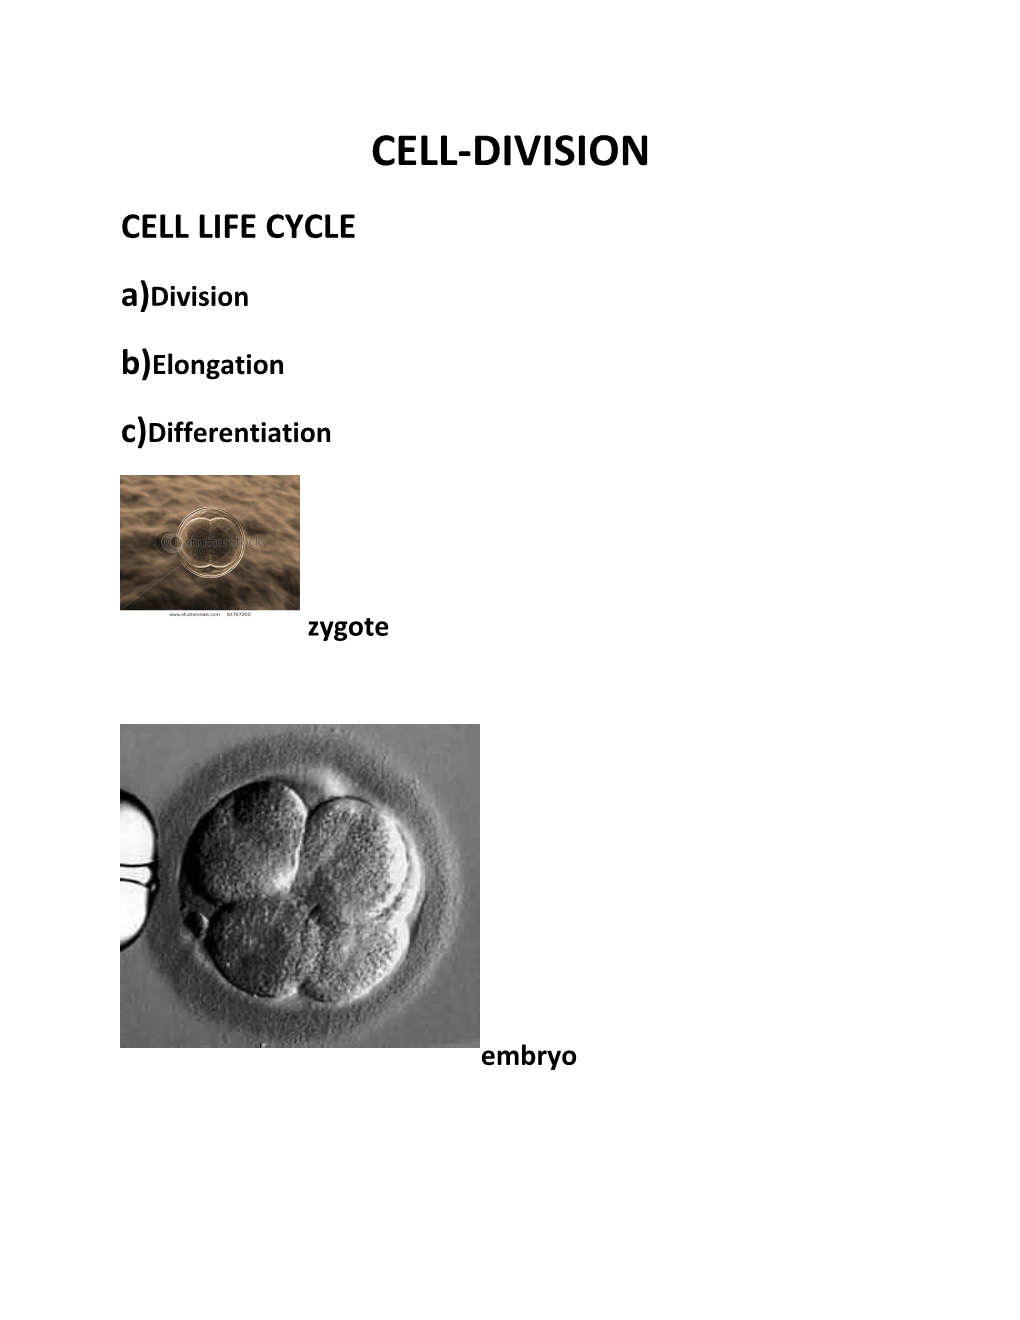 1.INTERPHASE(Resting)